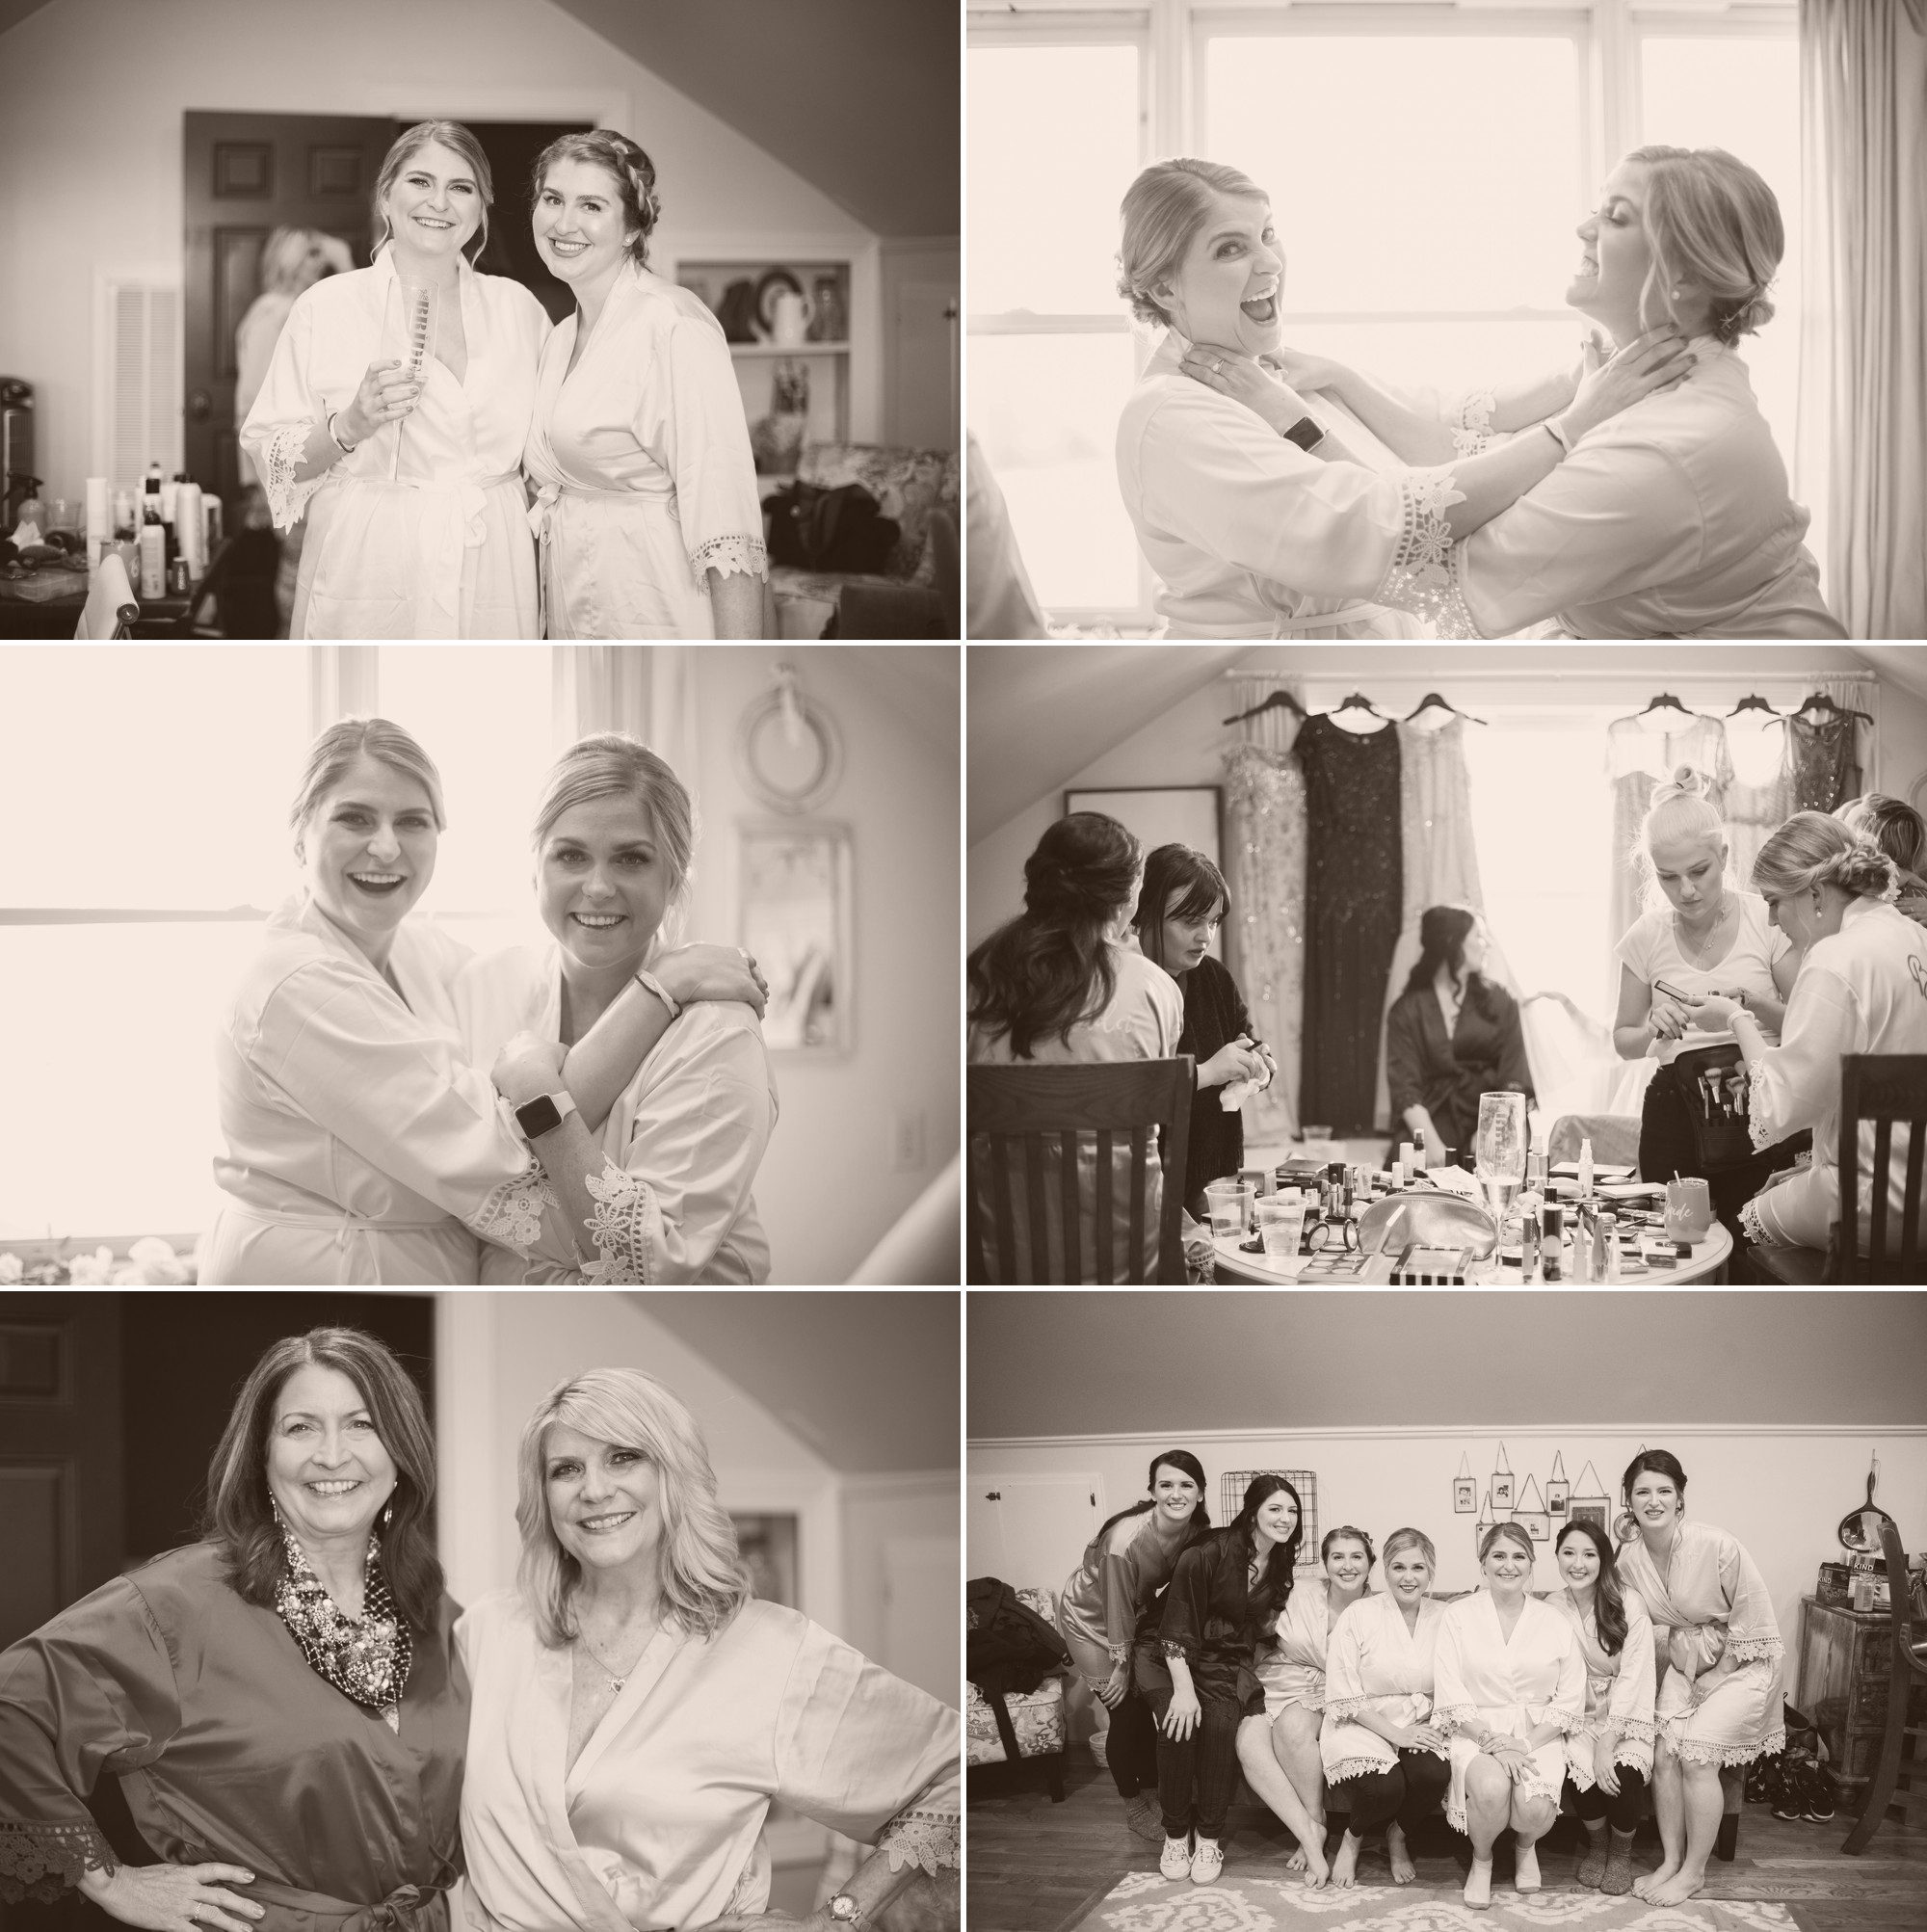 Bridal party gets ready upstairs at McConnell House in Franklin, TN before wedding ceremony. Photos by Krista Lee Photography Nashville, TN